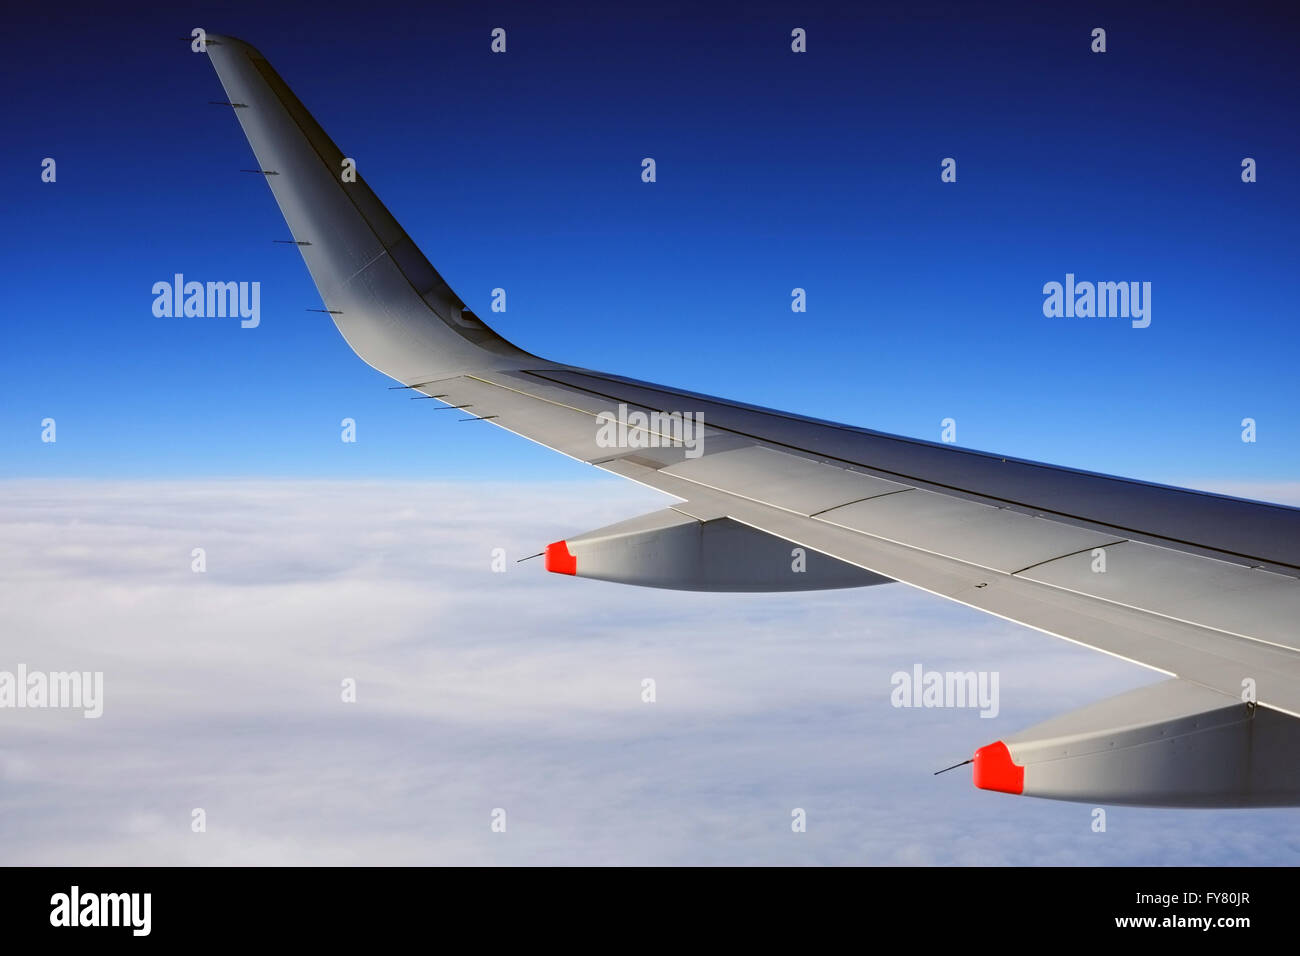 Wing of a British Airways Airbus A319 airplane in flight. Stock Photo